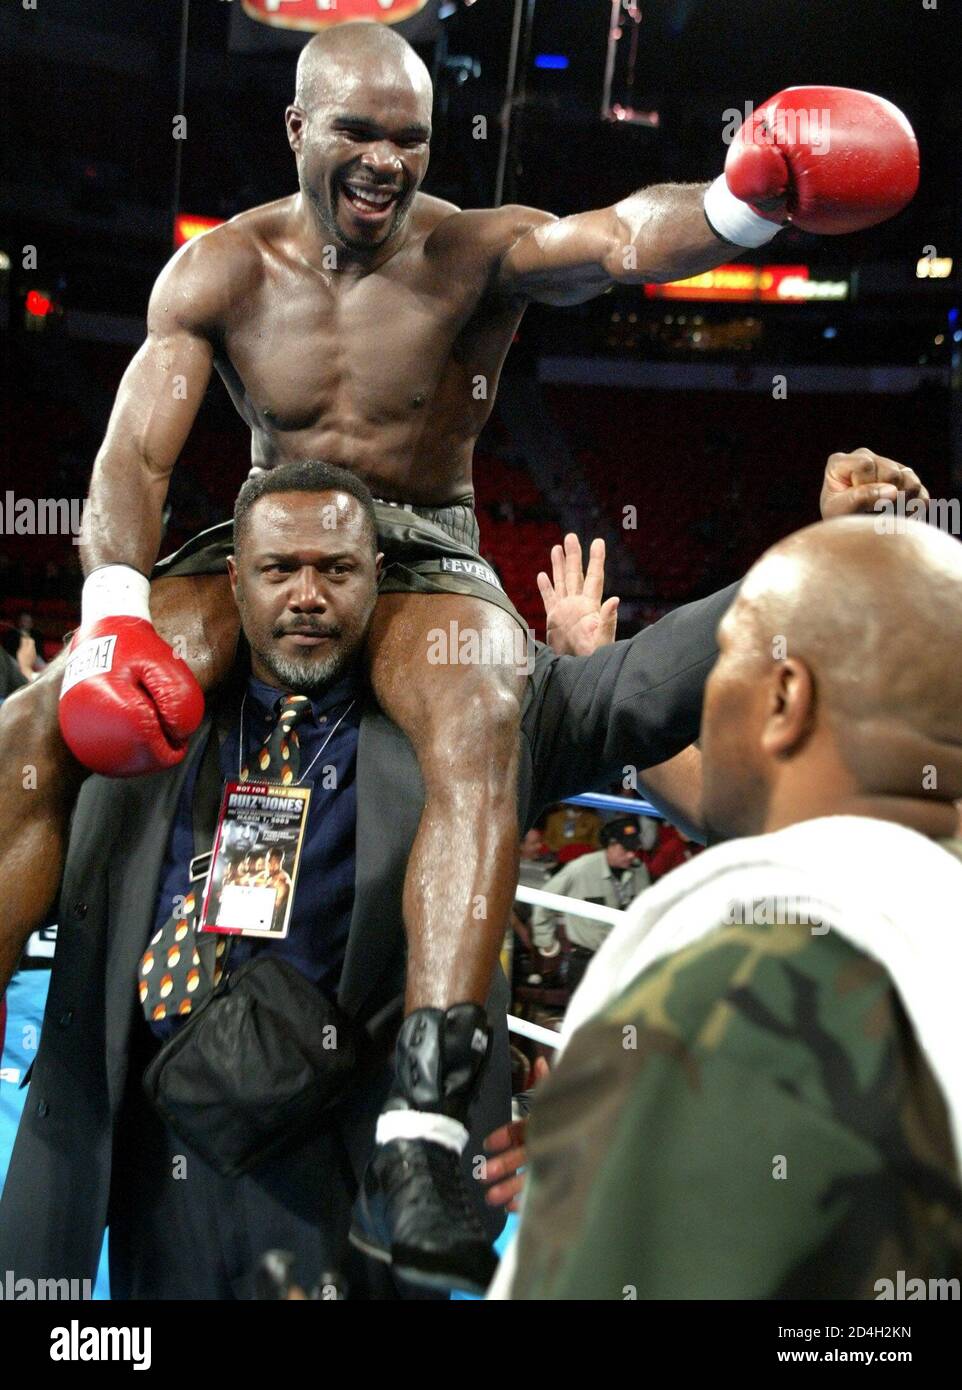 WBA cruiserweight champion Jean-Marc Mormeck, of Noisy LeGrand, France, sits atop his as he celebrates his victory [over Alexander Gurov, of Marioupol, Ukraine], at the Thomas & Mack Center in Las Vegas, Nevada on March 1, 2003. Mormeck retained his title with an eighth round TKO. Stock Photo